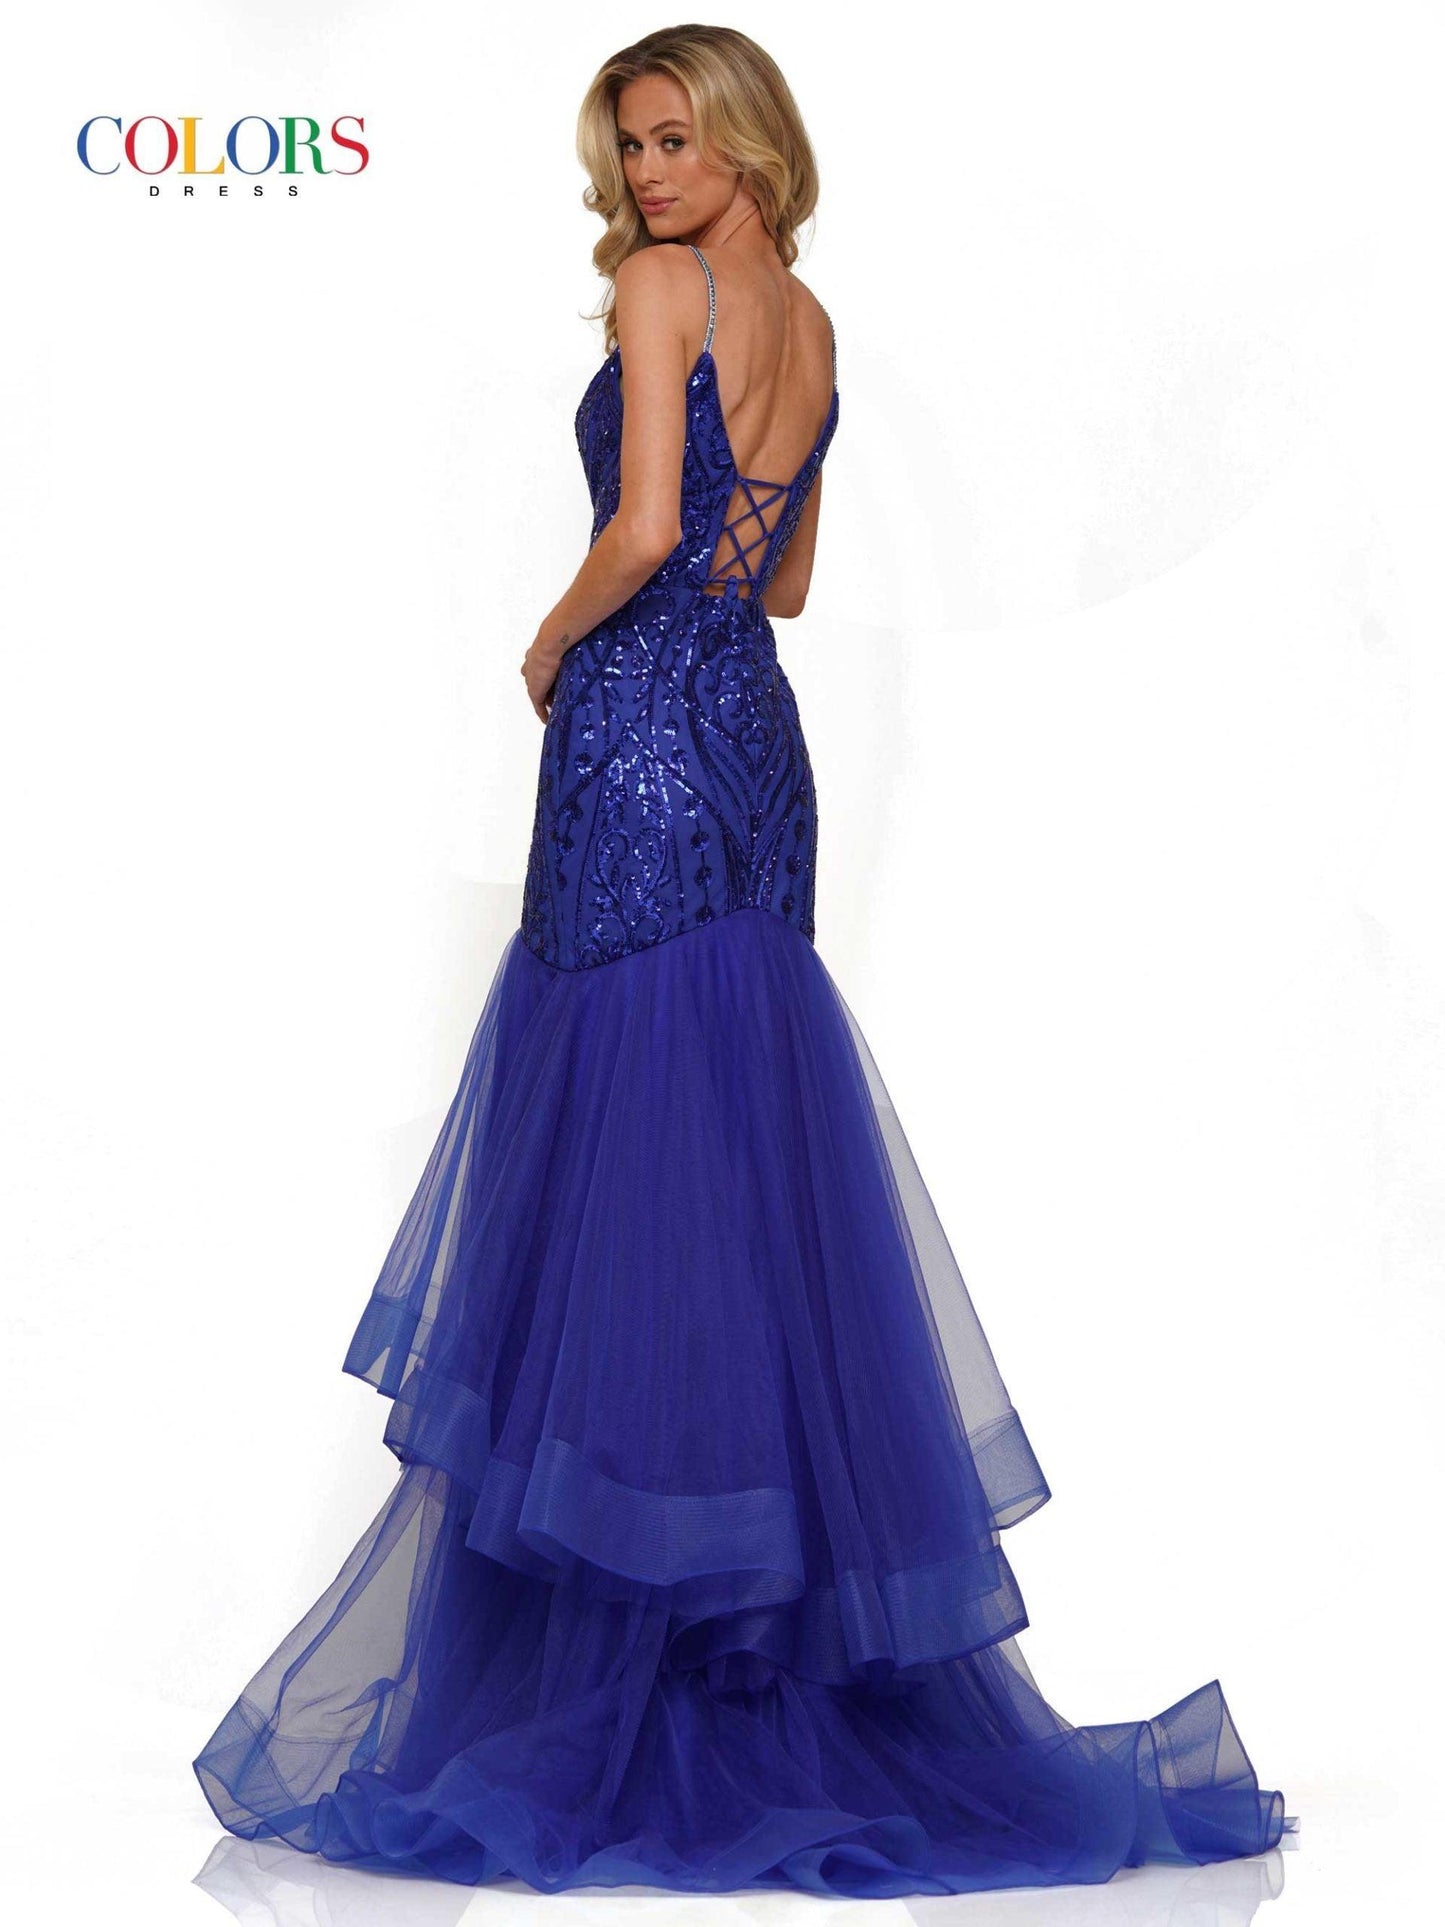 Colors Fitted Long Evening Dress 2978 - The Dress Outlet